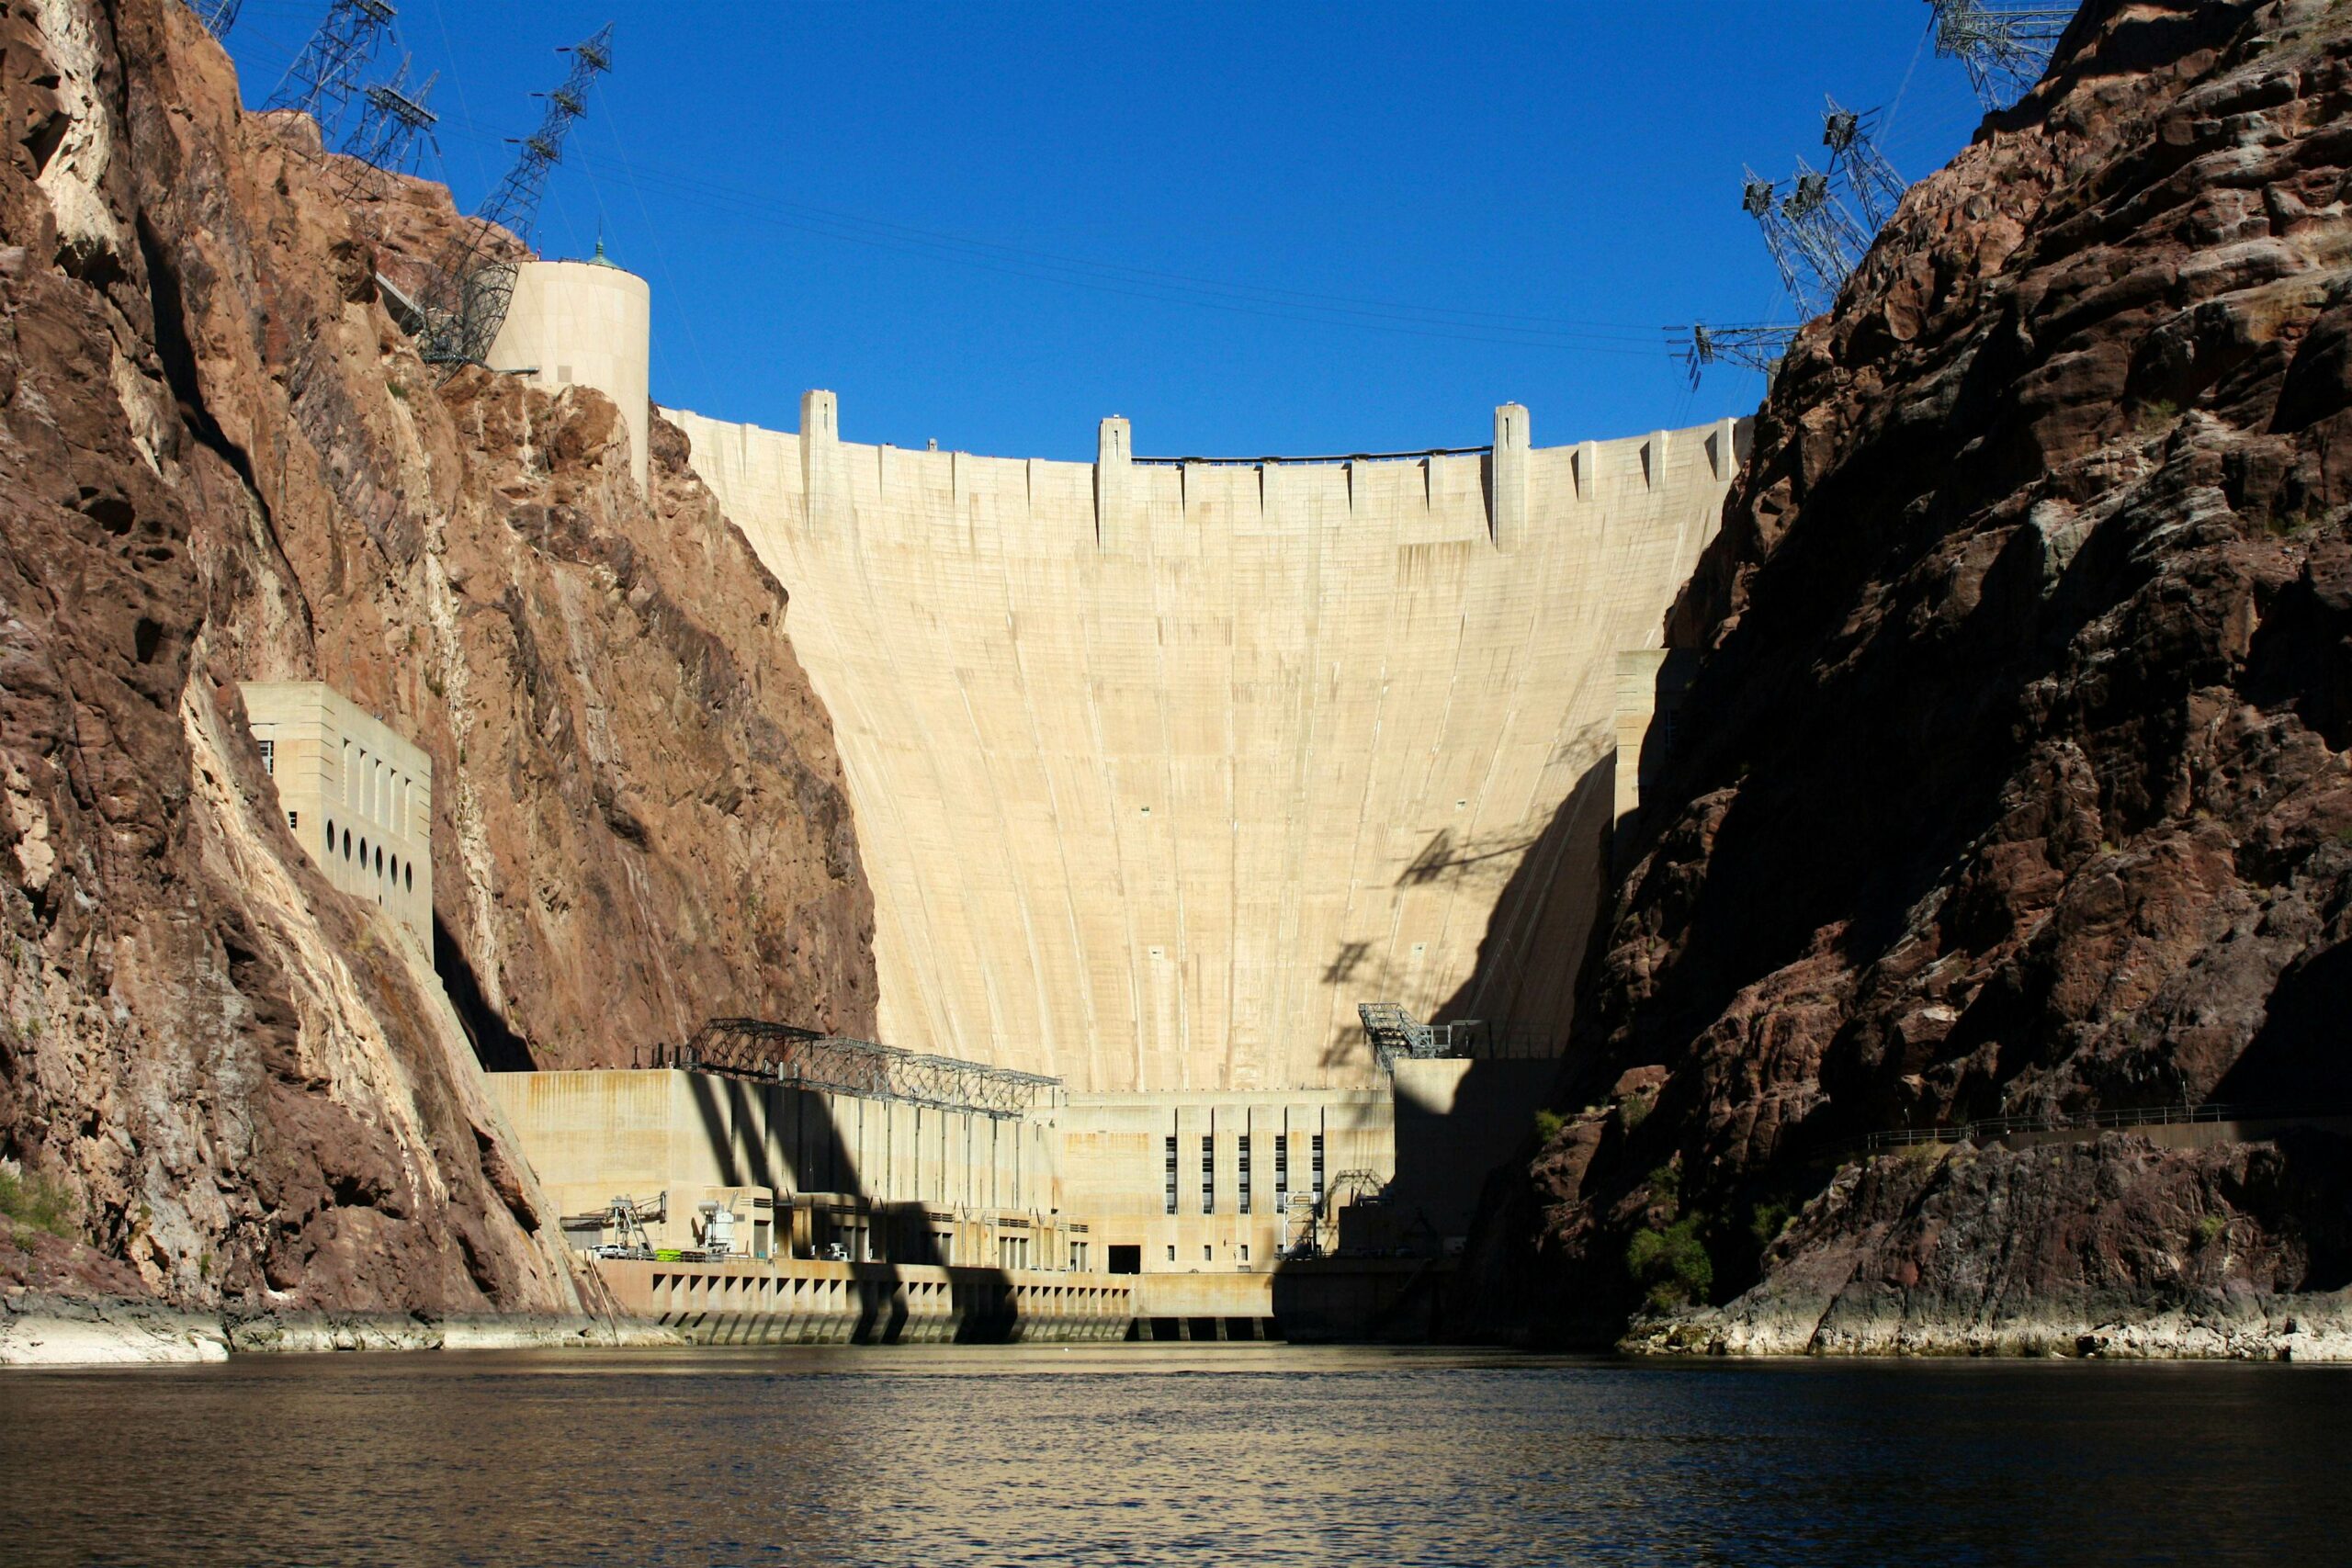 Discovering The Fascinating History Behind The Naming Of Hoover Dam: Who Is It Named After?